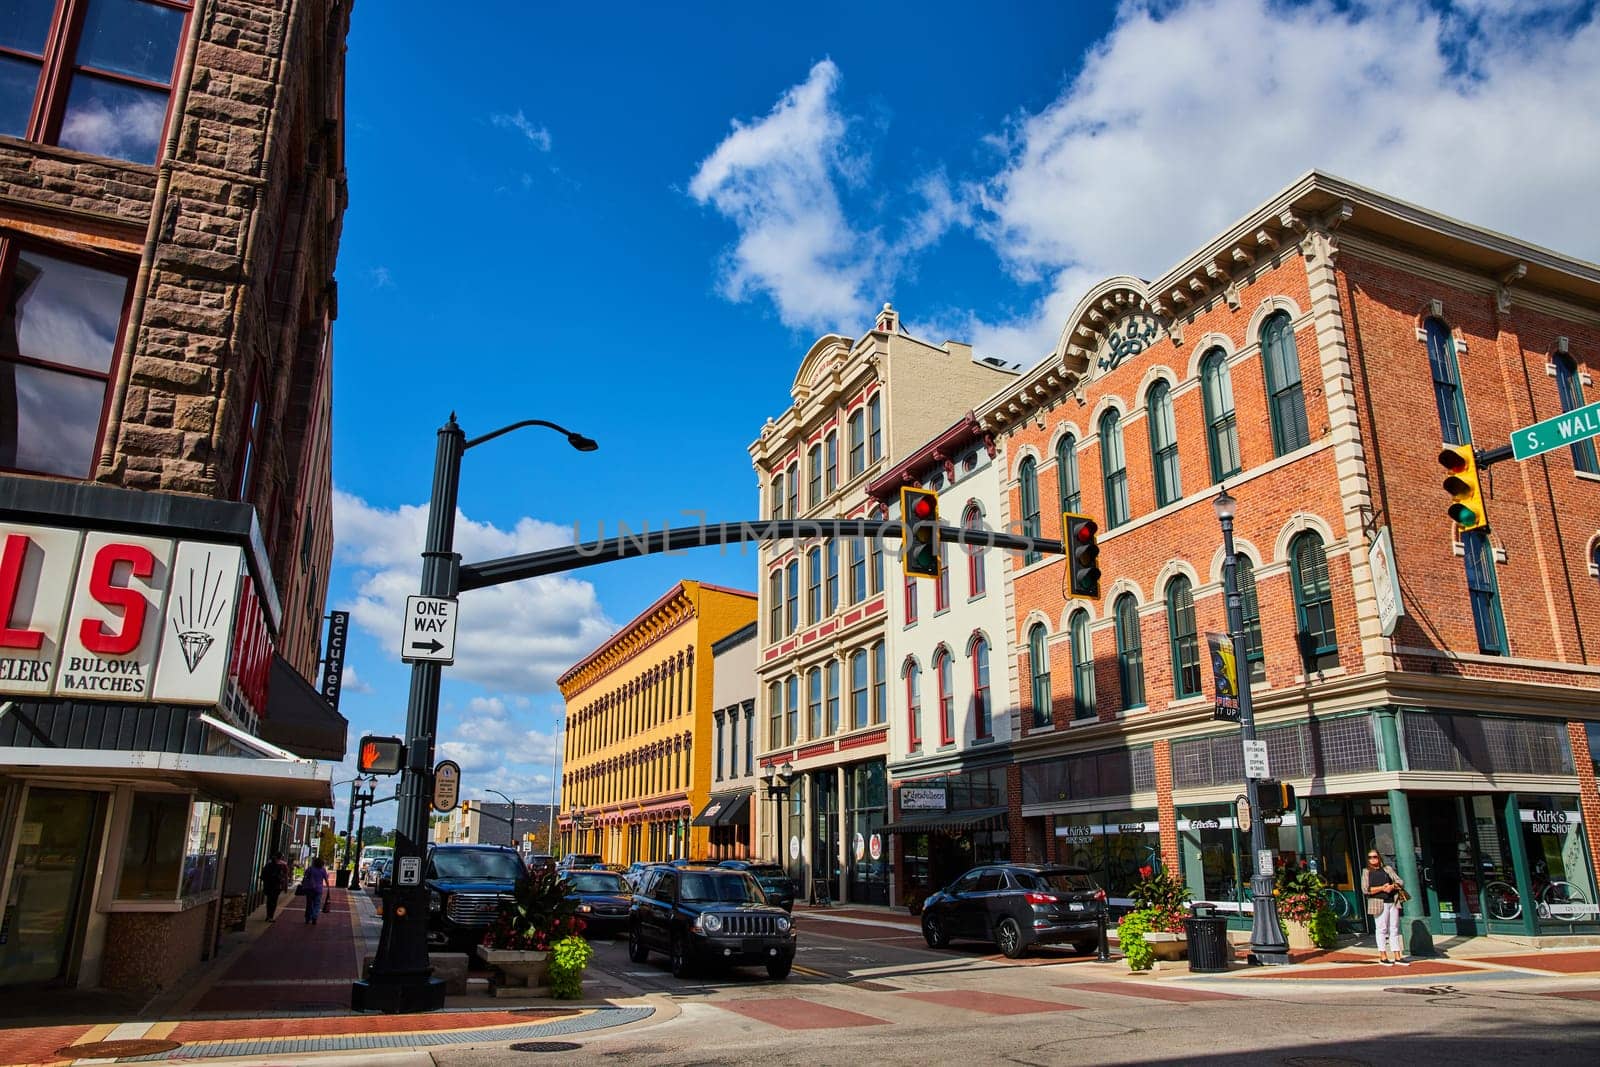 Vibrant Urban Street Corner with Historic Buildings and City Traffic, Muncie by njproductions